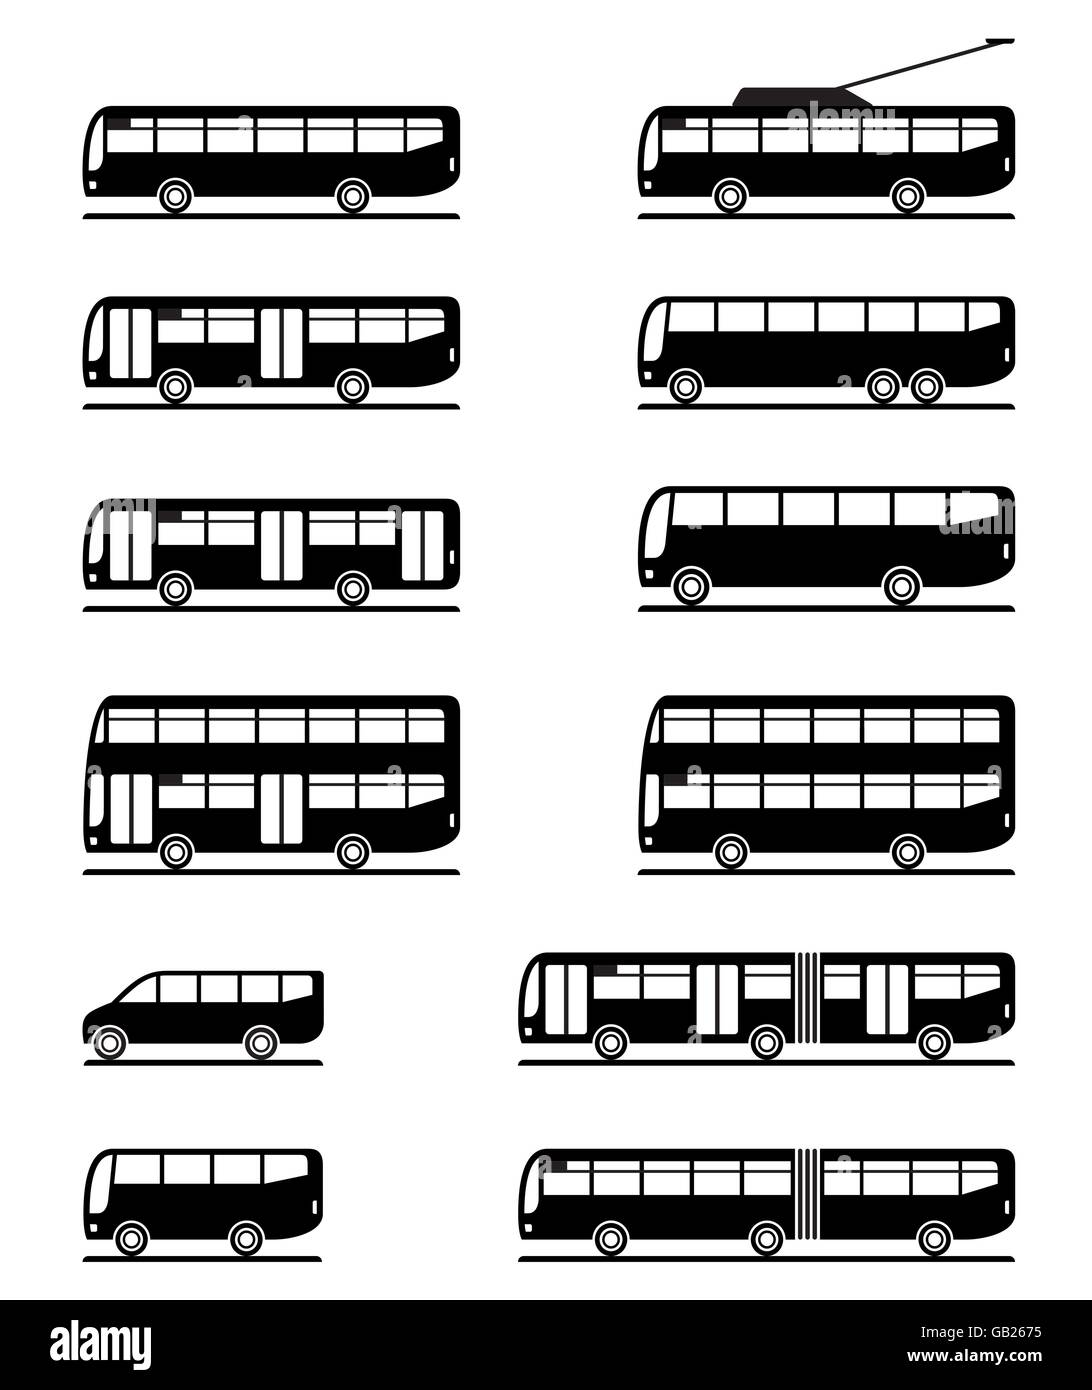 Buses and coaches - vector illustration Stock Vector